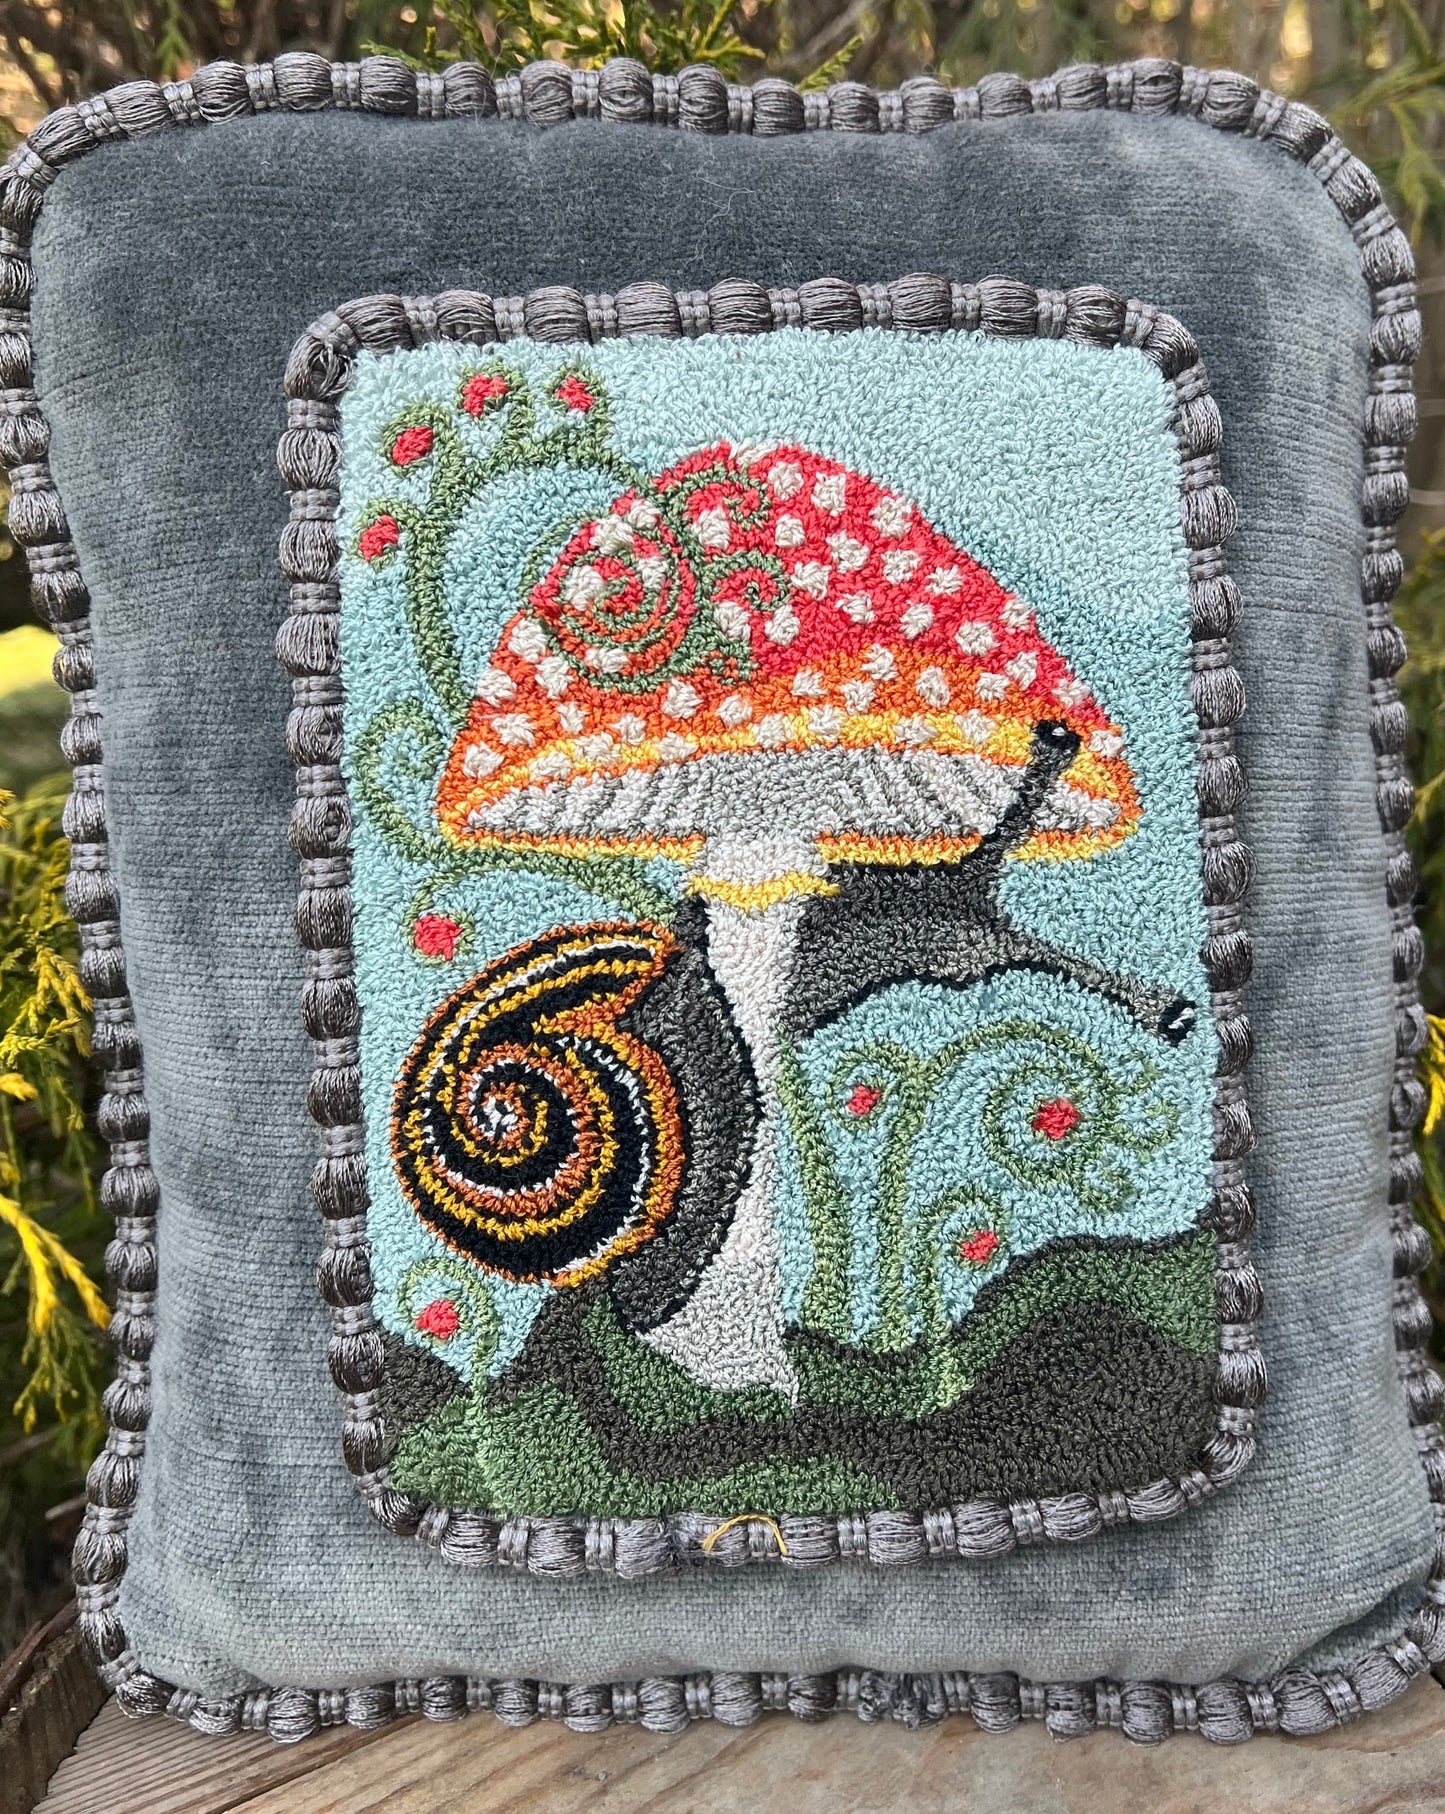 The Pattern Entwined is a punch Needle Embroidery pattern that used thread and a punch needle to create the design. Entwinted design depicts a snail wrapping itself around a colorful mushroom. Copyright © 2024 Kelly Kanyok of Orphaned Wool.